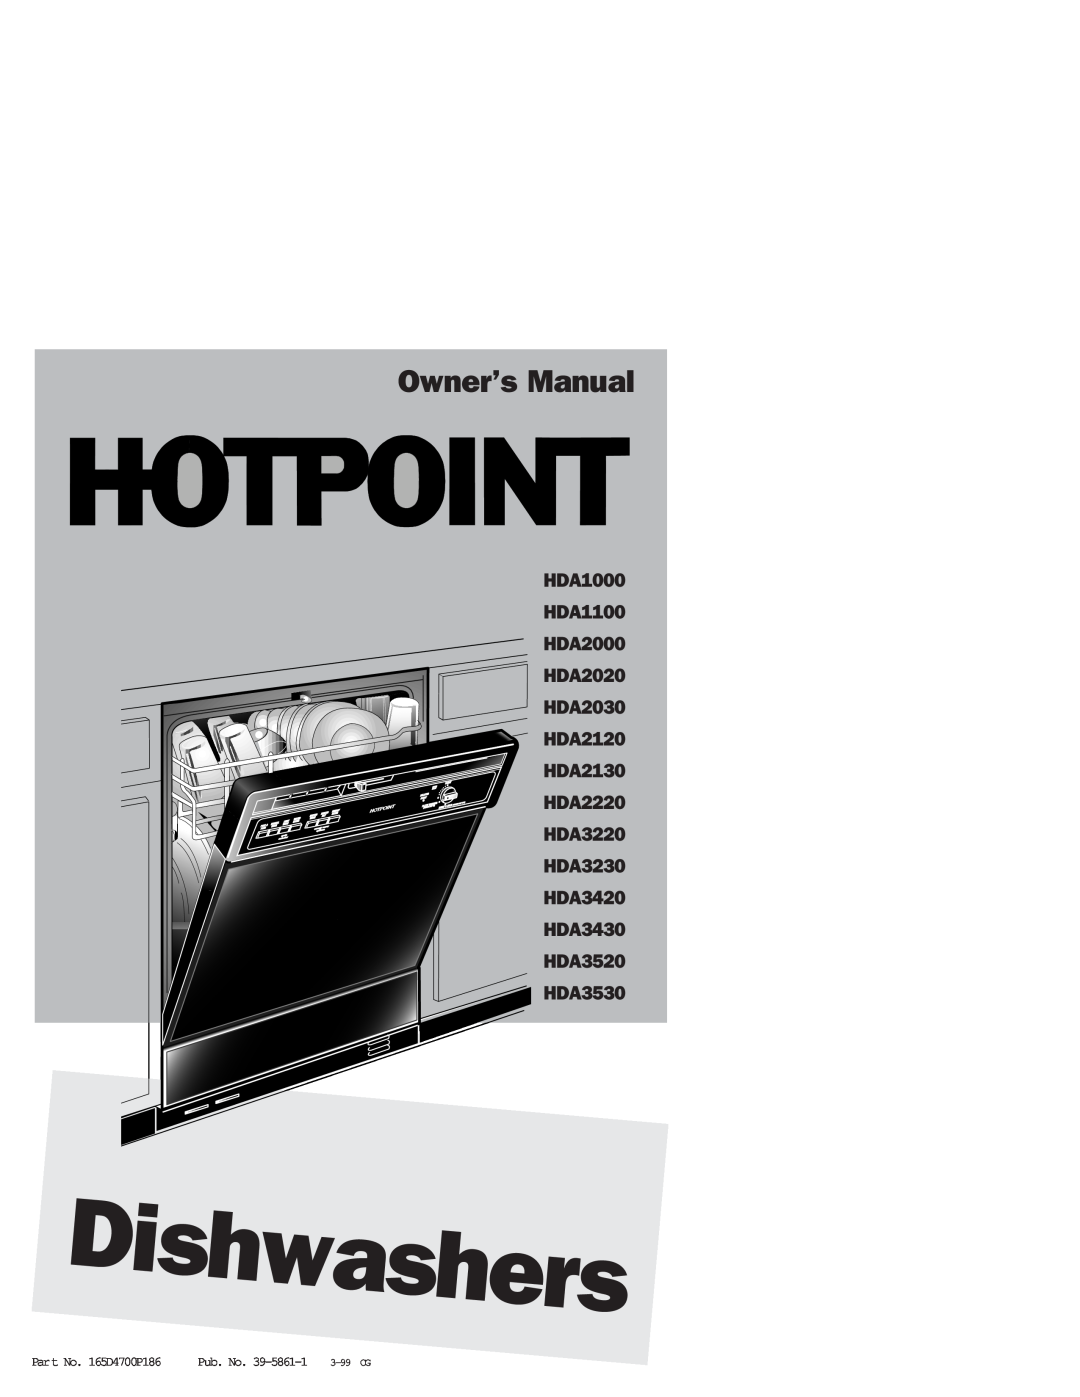 Hotpoint owner manual Owner’s Manual, HDA1000 HDA1100 HDA2000 HDA2020 HDA2030 HDA2120, HDA3520 HDA3530, Pub. No, 3-99CG 